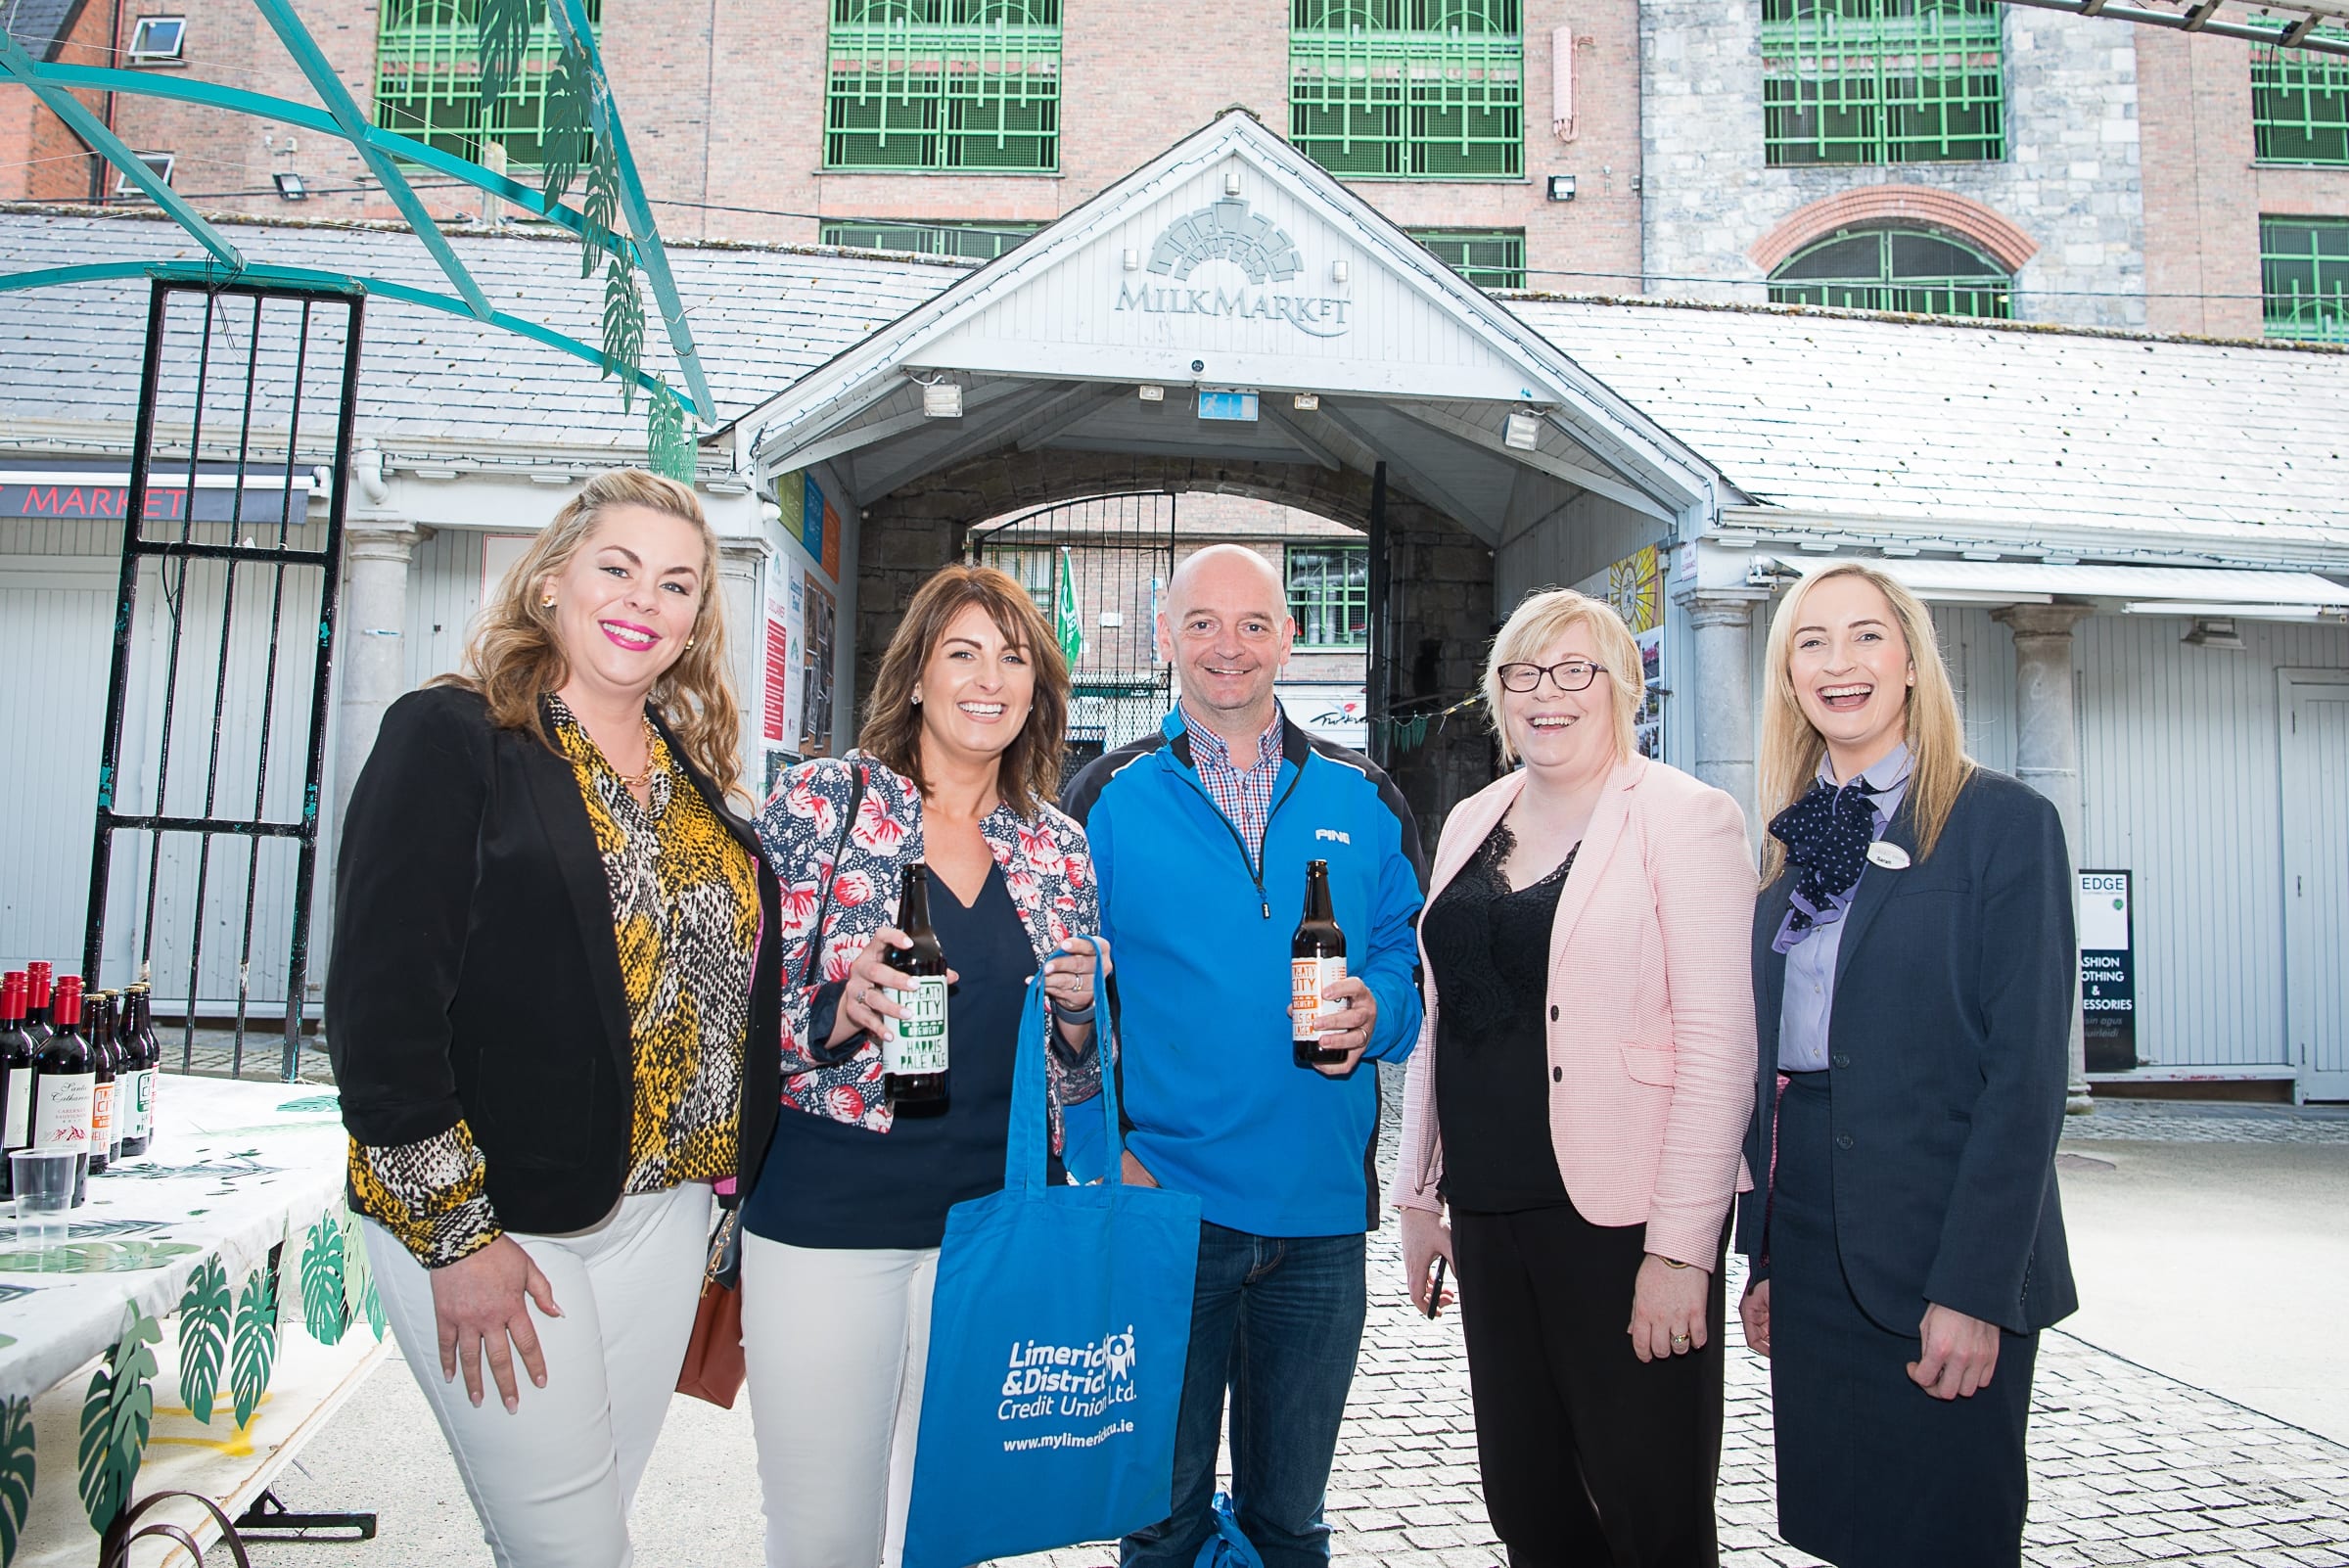 From Left to Right:  Regional Leaders BBQ which took place on the 6th June in the Limerick Milk Market:    Ursula MacKenzie - Employability, Michelle O’Connor - Employability, Fergus Chawke - Employmum, Katherine Dalton - Limerick and  District Credit Union, Sarah Barry  - Limerick and  District Credit Union, 
Photo by Morning Star Photography